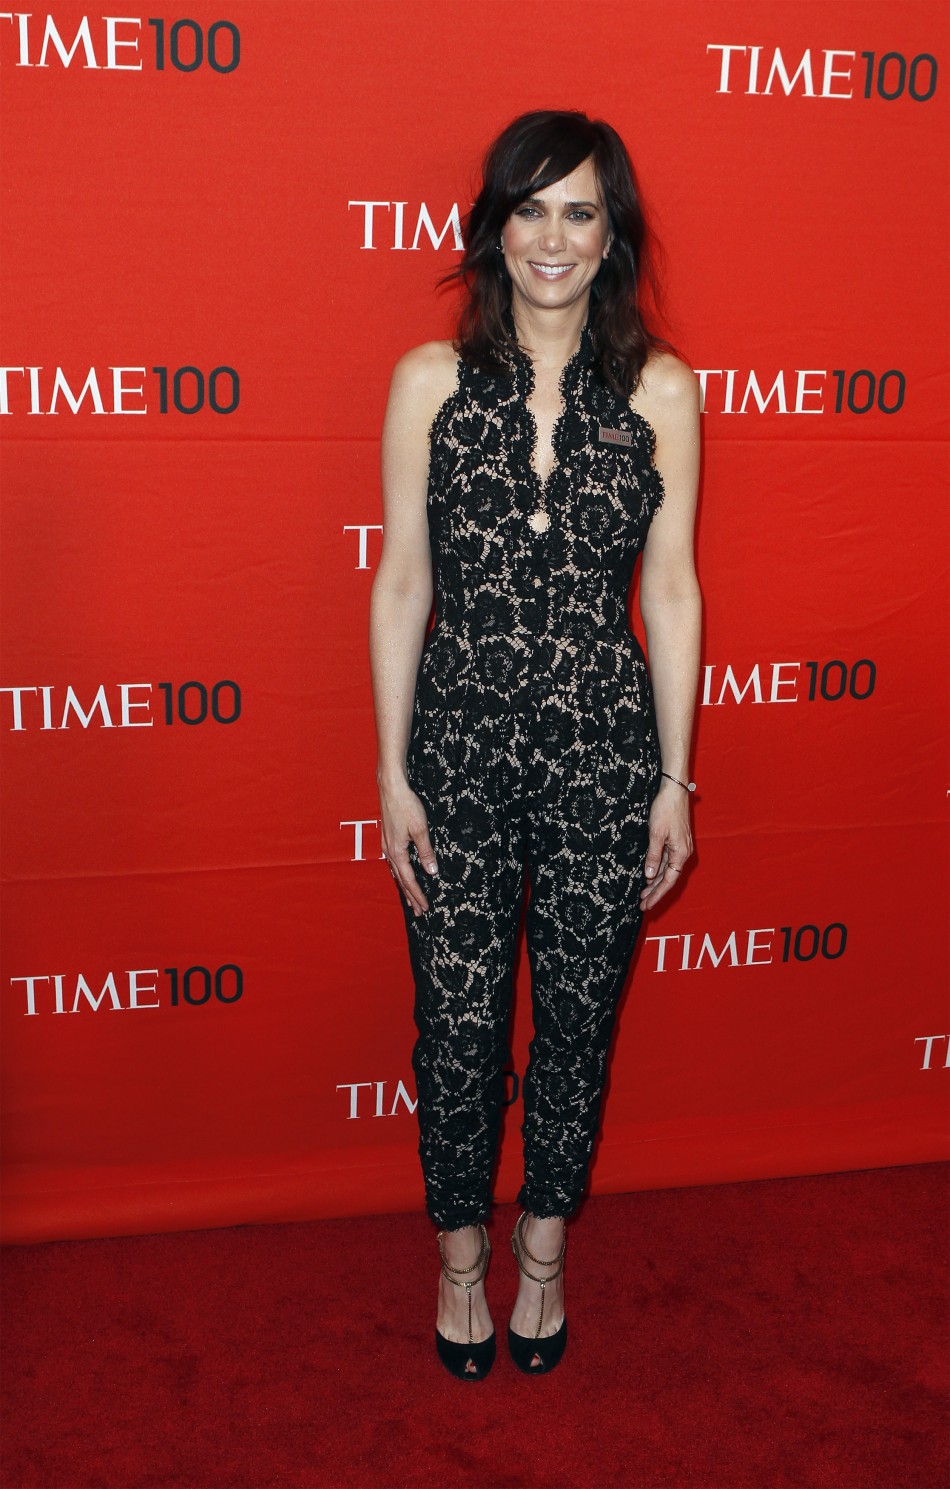 Actress Kristen Wiig arrives to be honored at the Time 100 Gala in New York